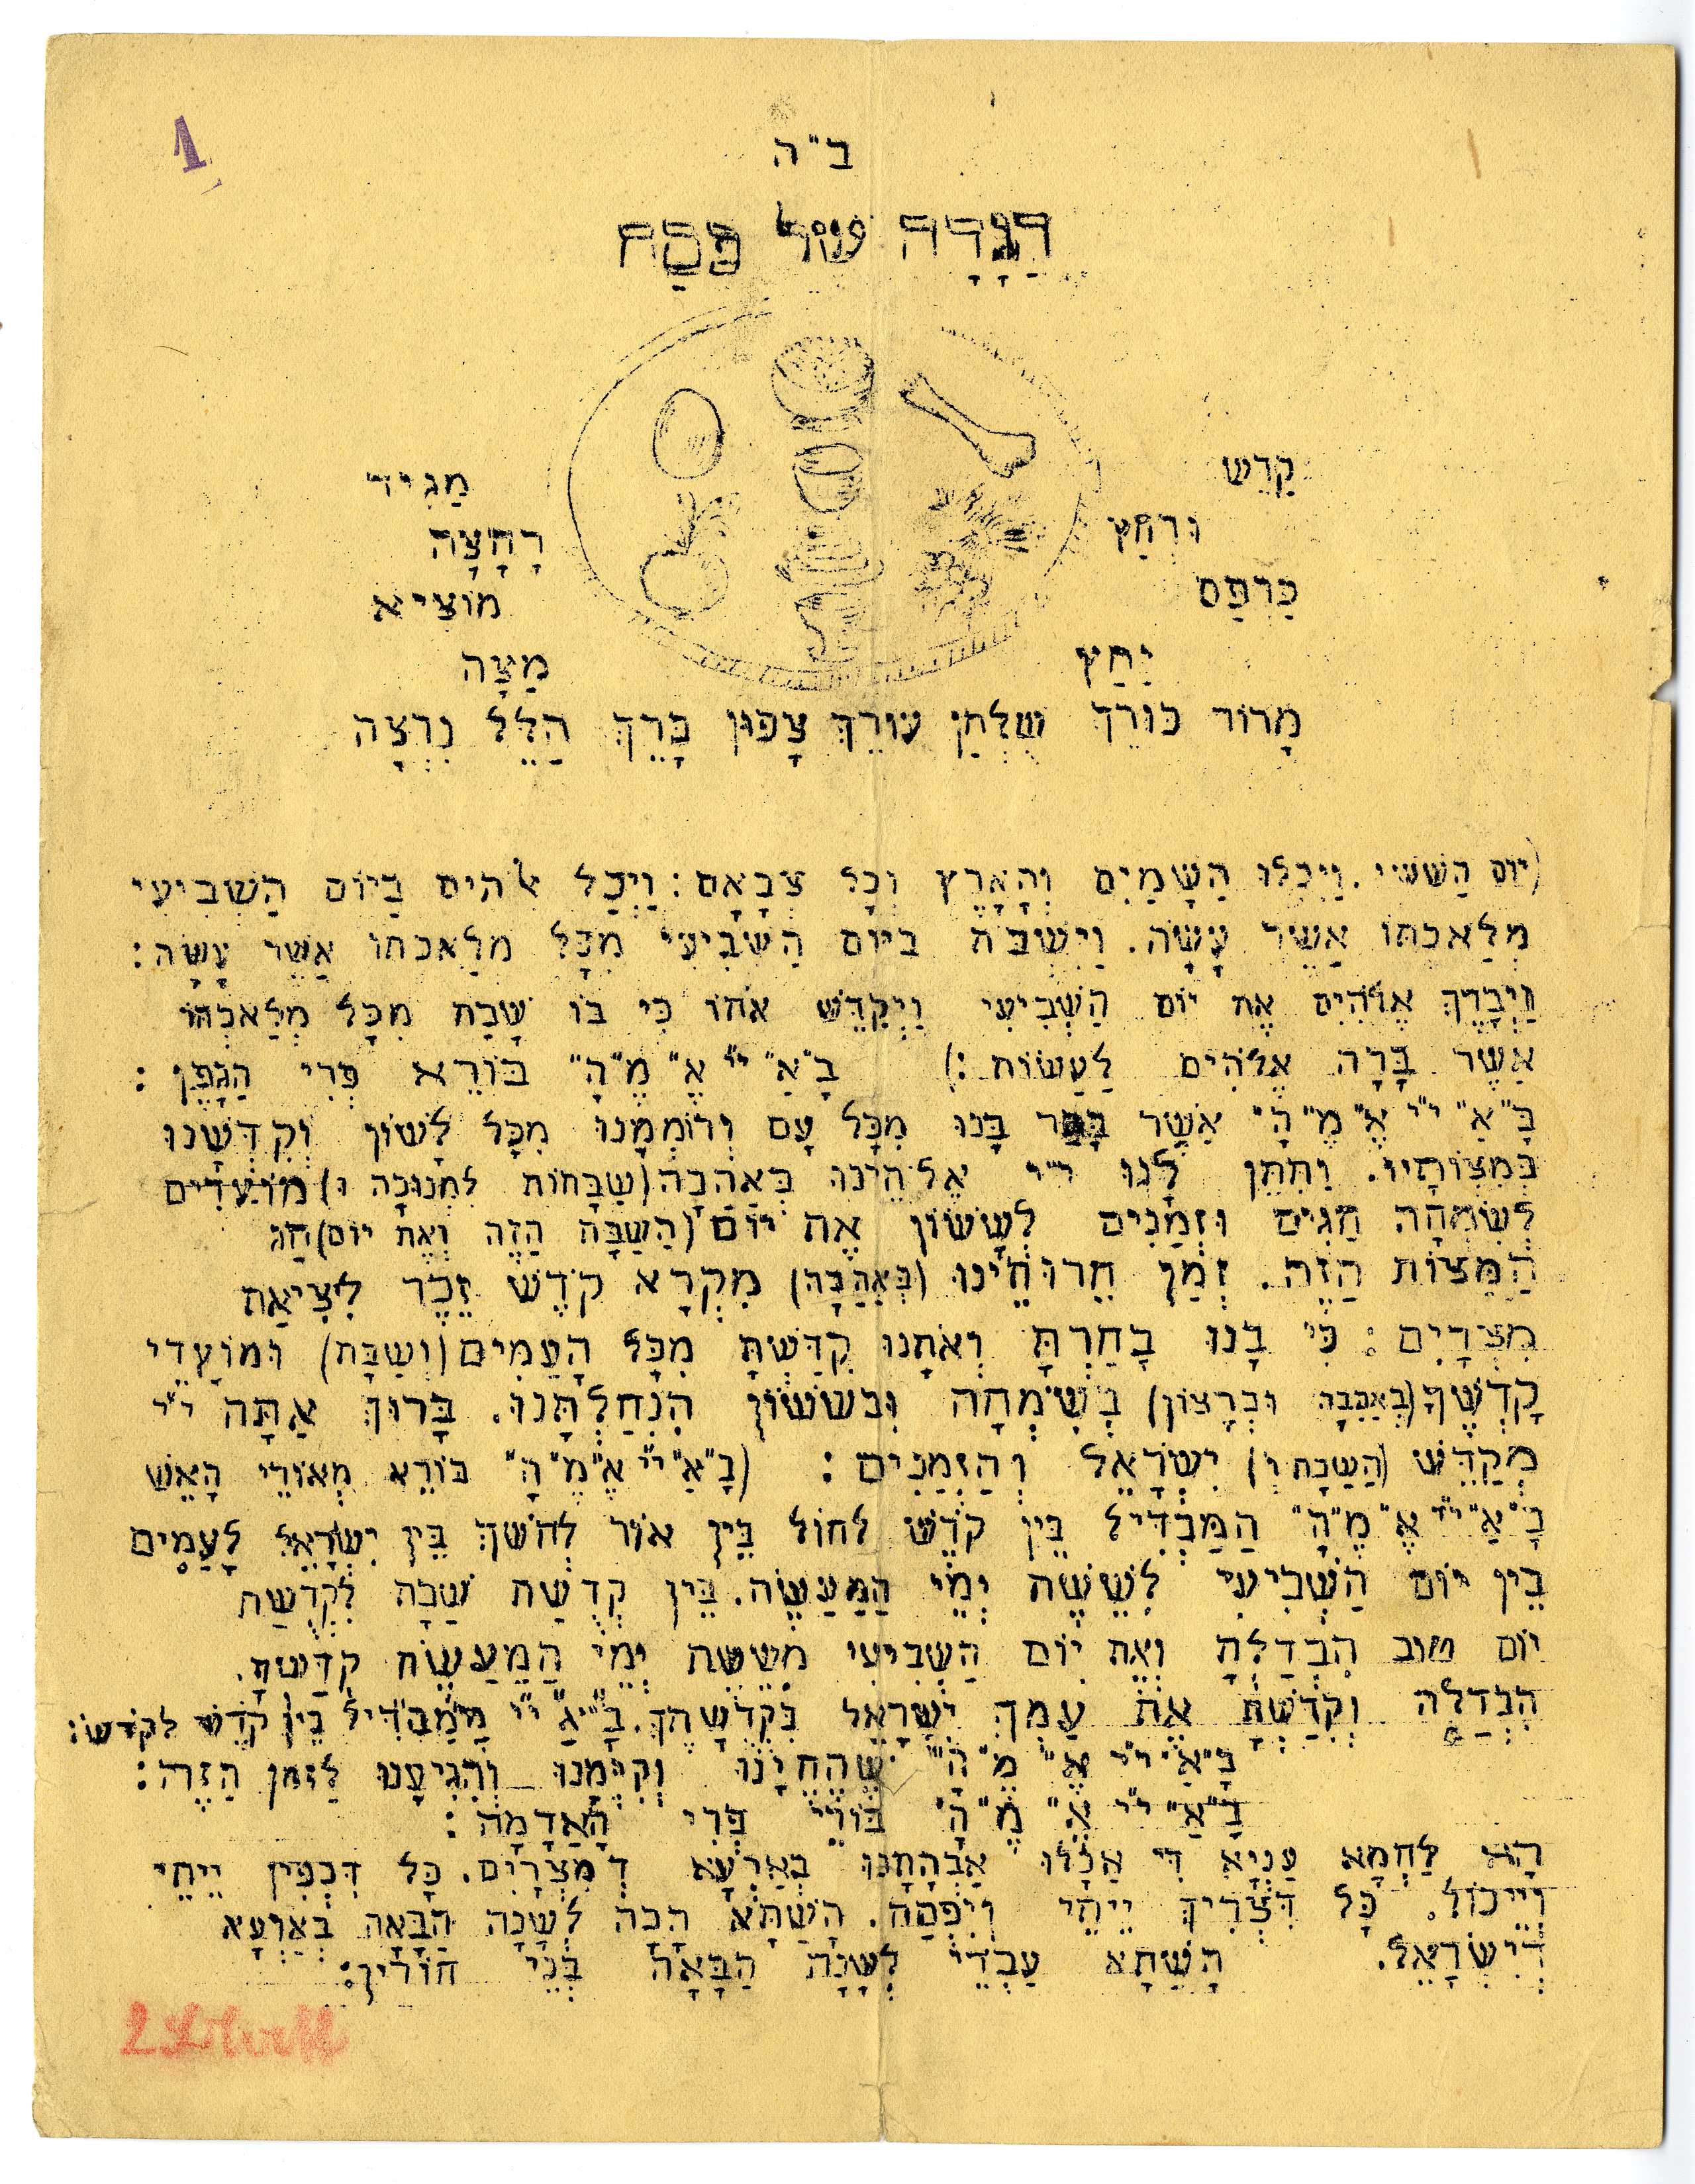 Passover Haggadah from the Gurs Camp | Experiencing History